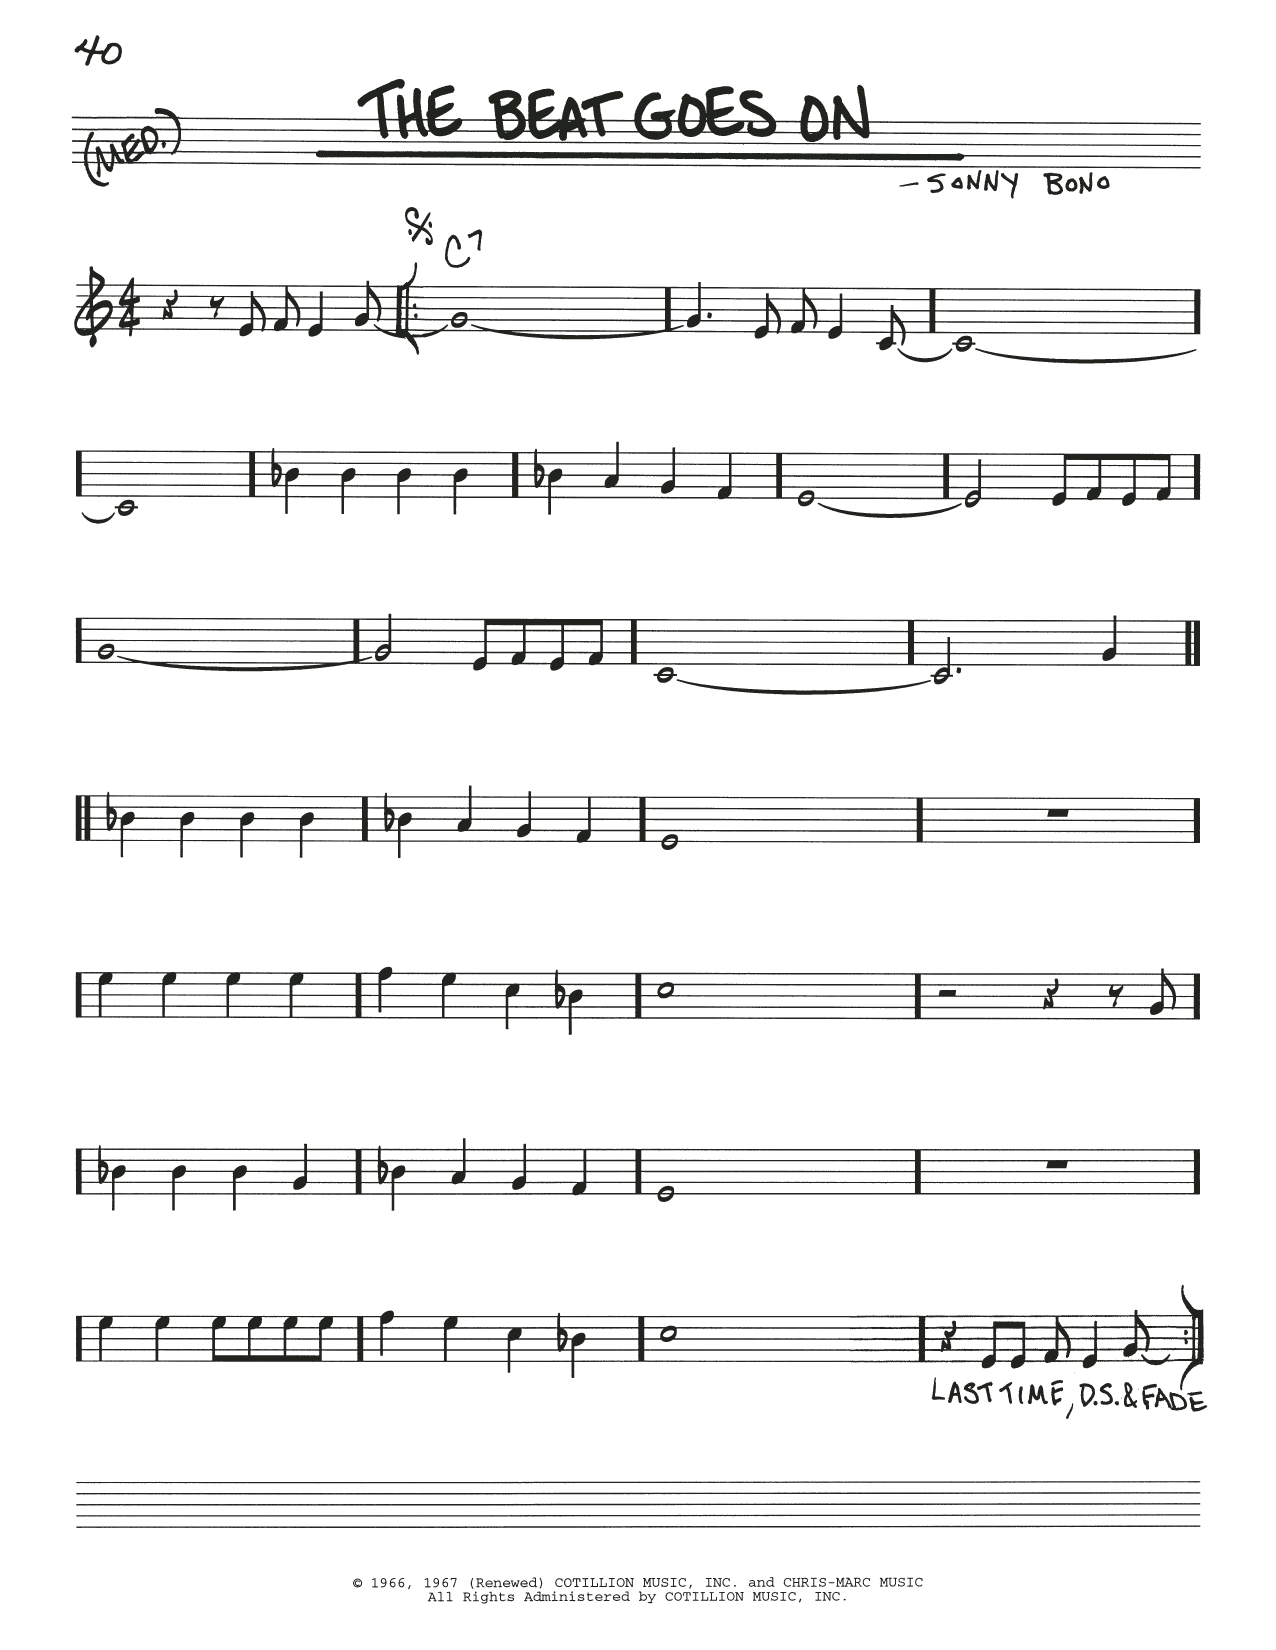 Download Sonny Bono The Beat Goes On Sheet Music